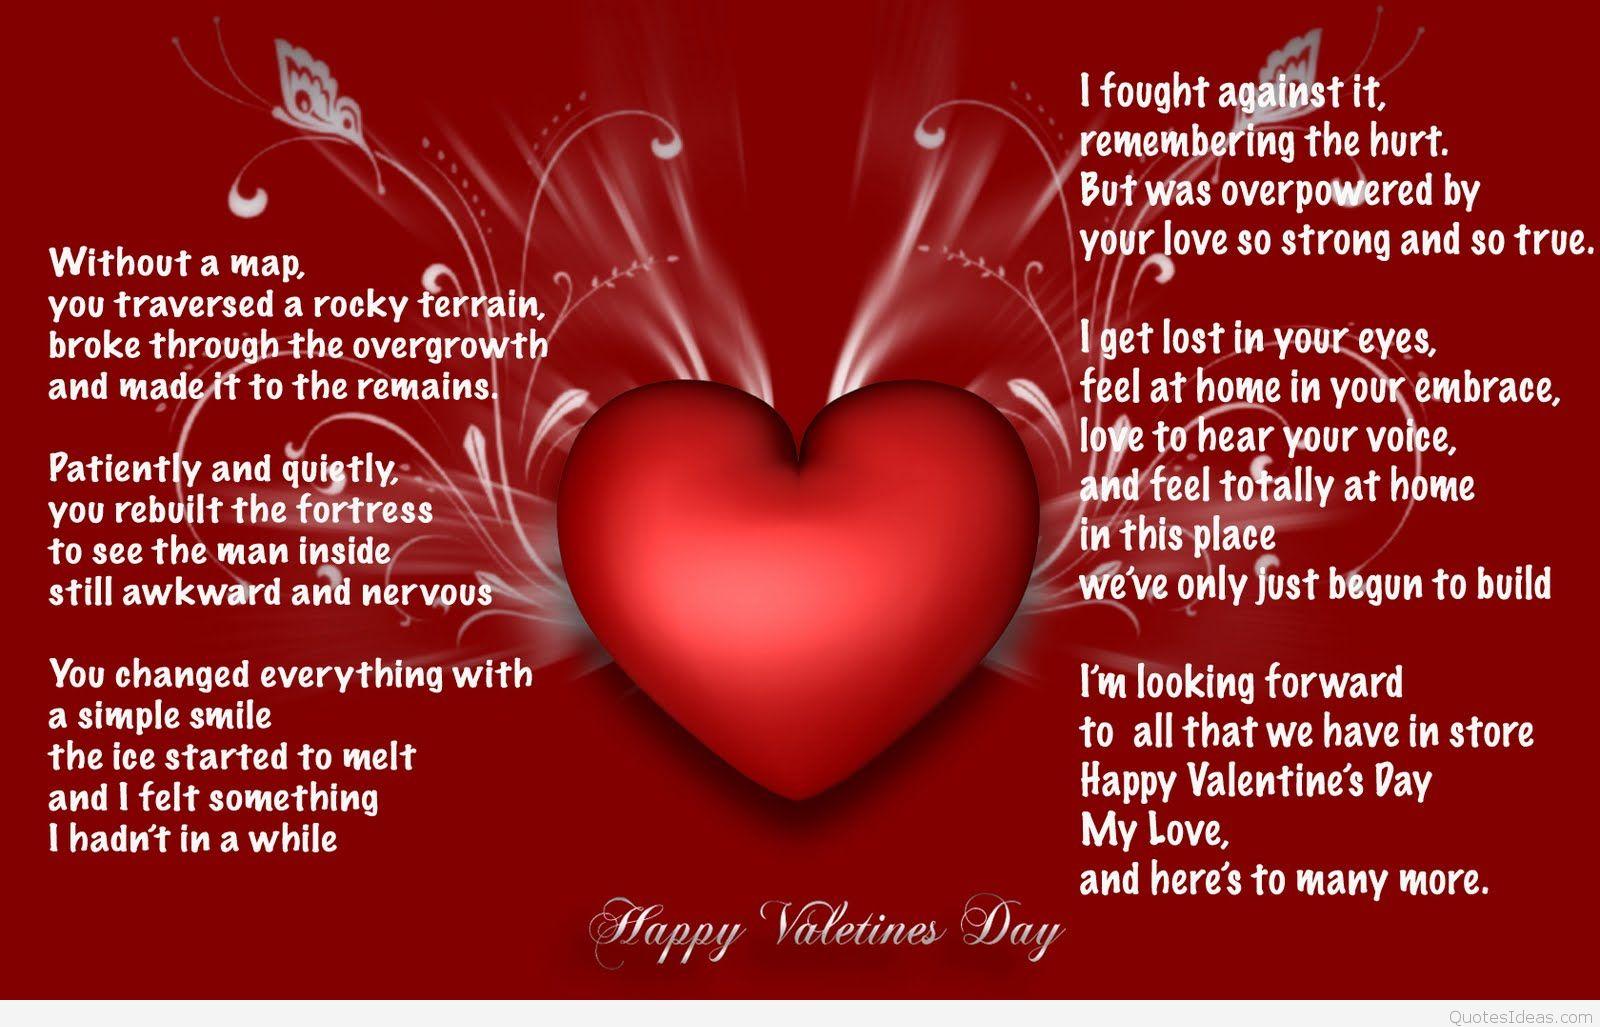 Valentine Marriage Quotes. Best Quotes for your Life